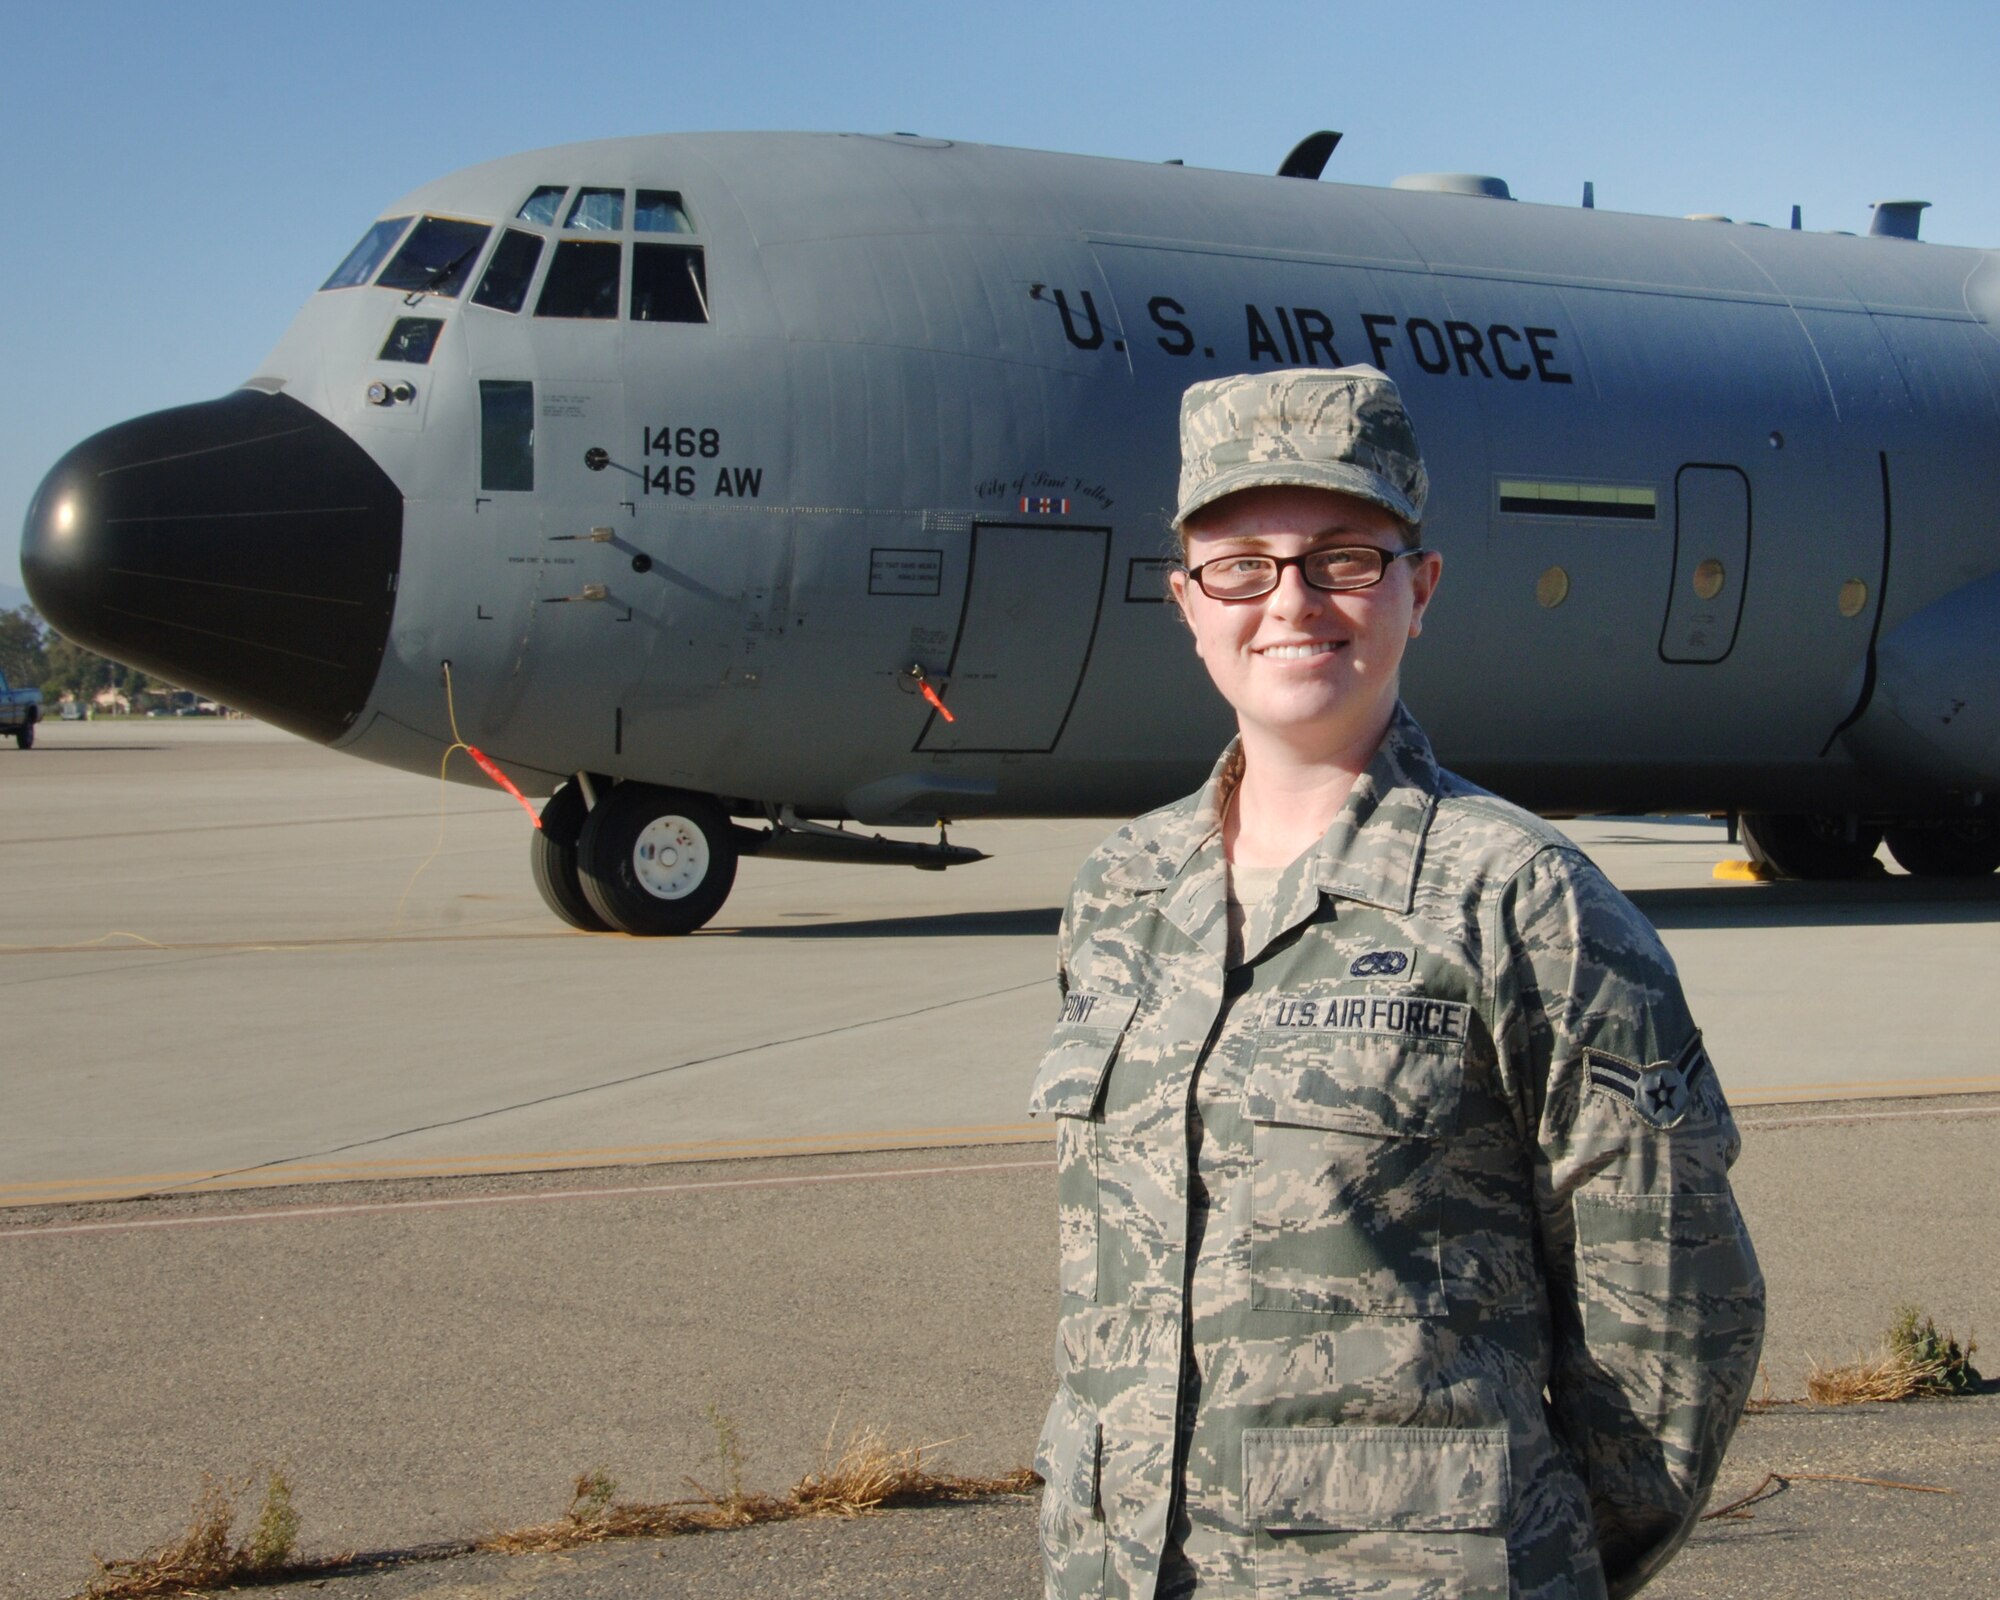 Meet Airman 1st Class Danielle Dupont, the newest addition to the 146th Airlift Wing's Maintenance, Aircraft Electrical and Environmental shop. We caught up with Dupont to find out a little more about her, who she is and what she sees in her future with the Air National Guard."  A native of the Camarillo area, Dupont grew up near the base and has known for a long time that the ANG was where she wanted to be. She just returned
recently from BMT and tech school and has been working to accomplish her "seasoning training" with her co-workers in Maintenance. Her supervisor boasts that she has a real aptitude within her field. "On her first day on the job, she was trouble-shooting electrical systems on the aircraft, and she found a problem that other more experienced people might have missed," said Master Sgt. Thomas Weaver.  "We have been very impressed with her and are glad to have her on our team." (photo by: Senior Airman Nicholas Carzis)